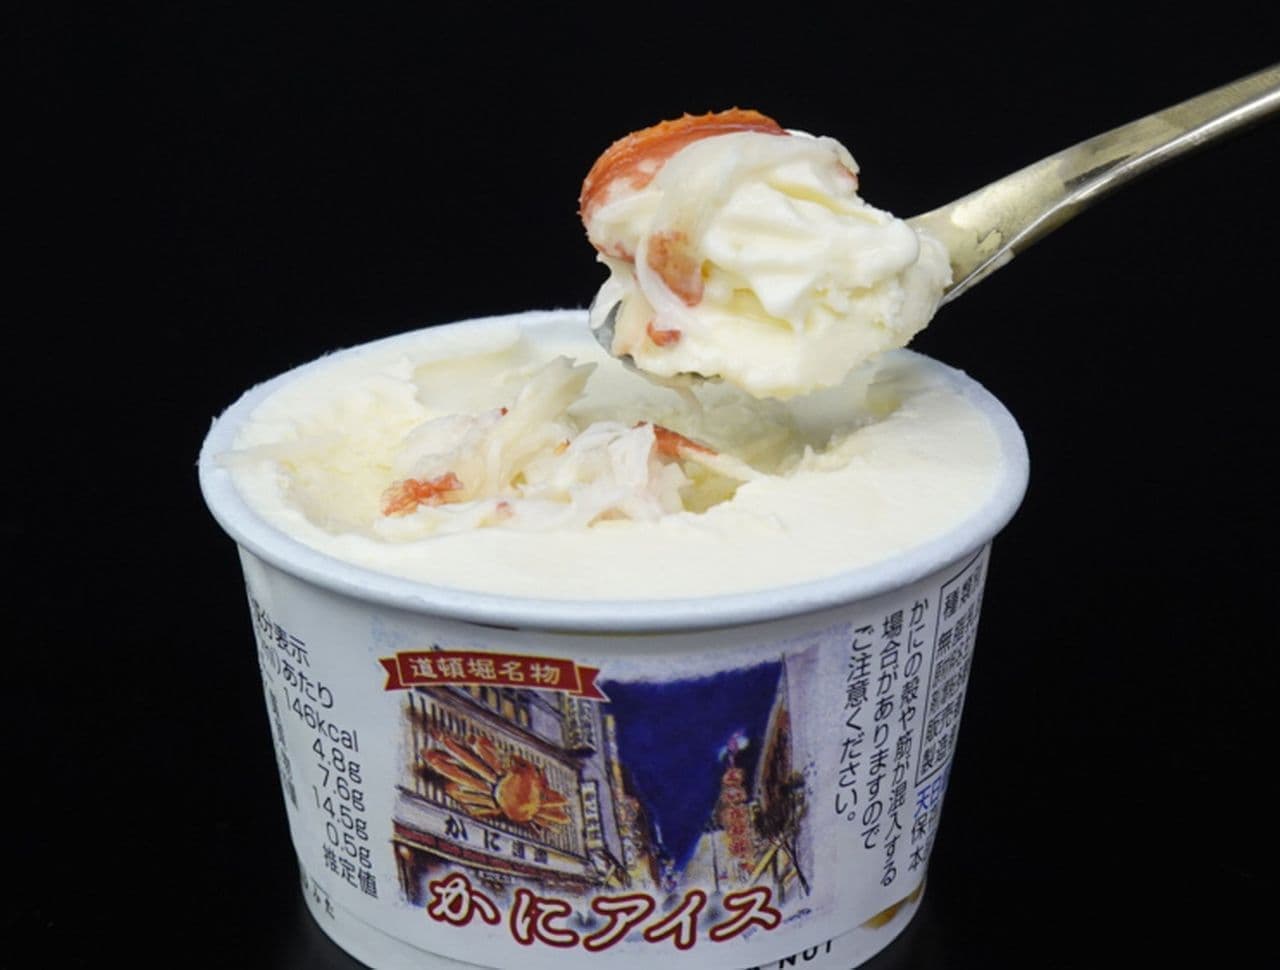 Crab ice cream" made by Kani-Douraku will be released on November 6.